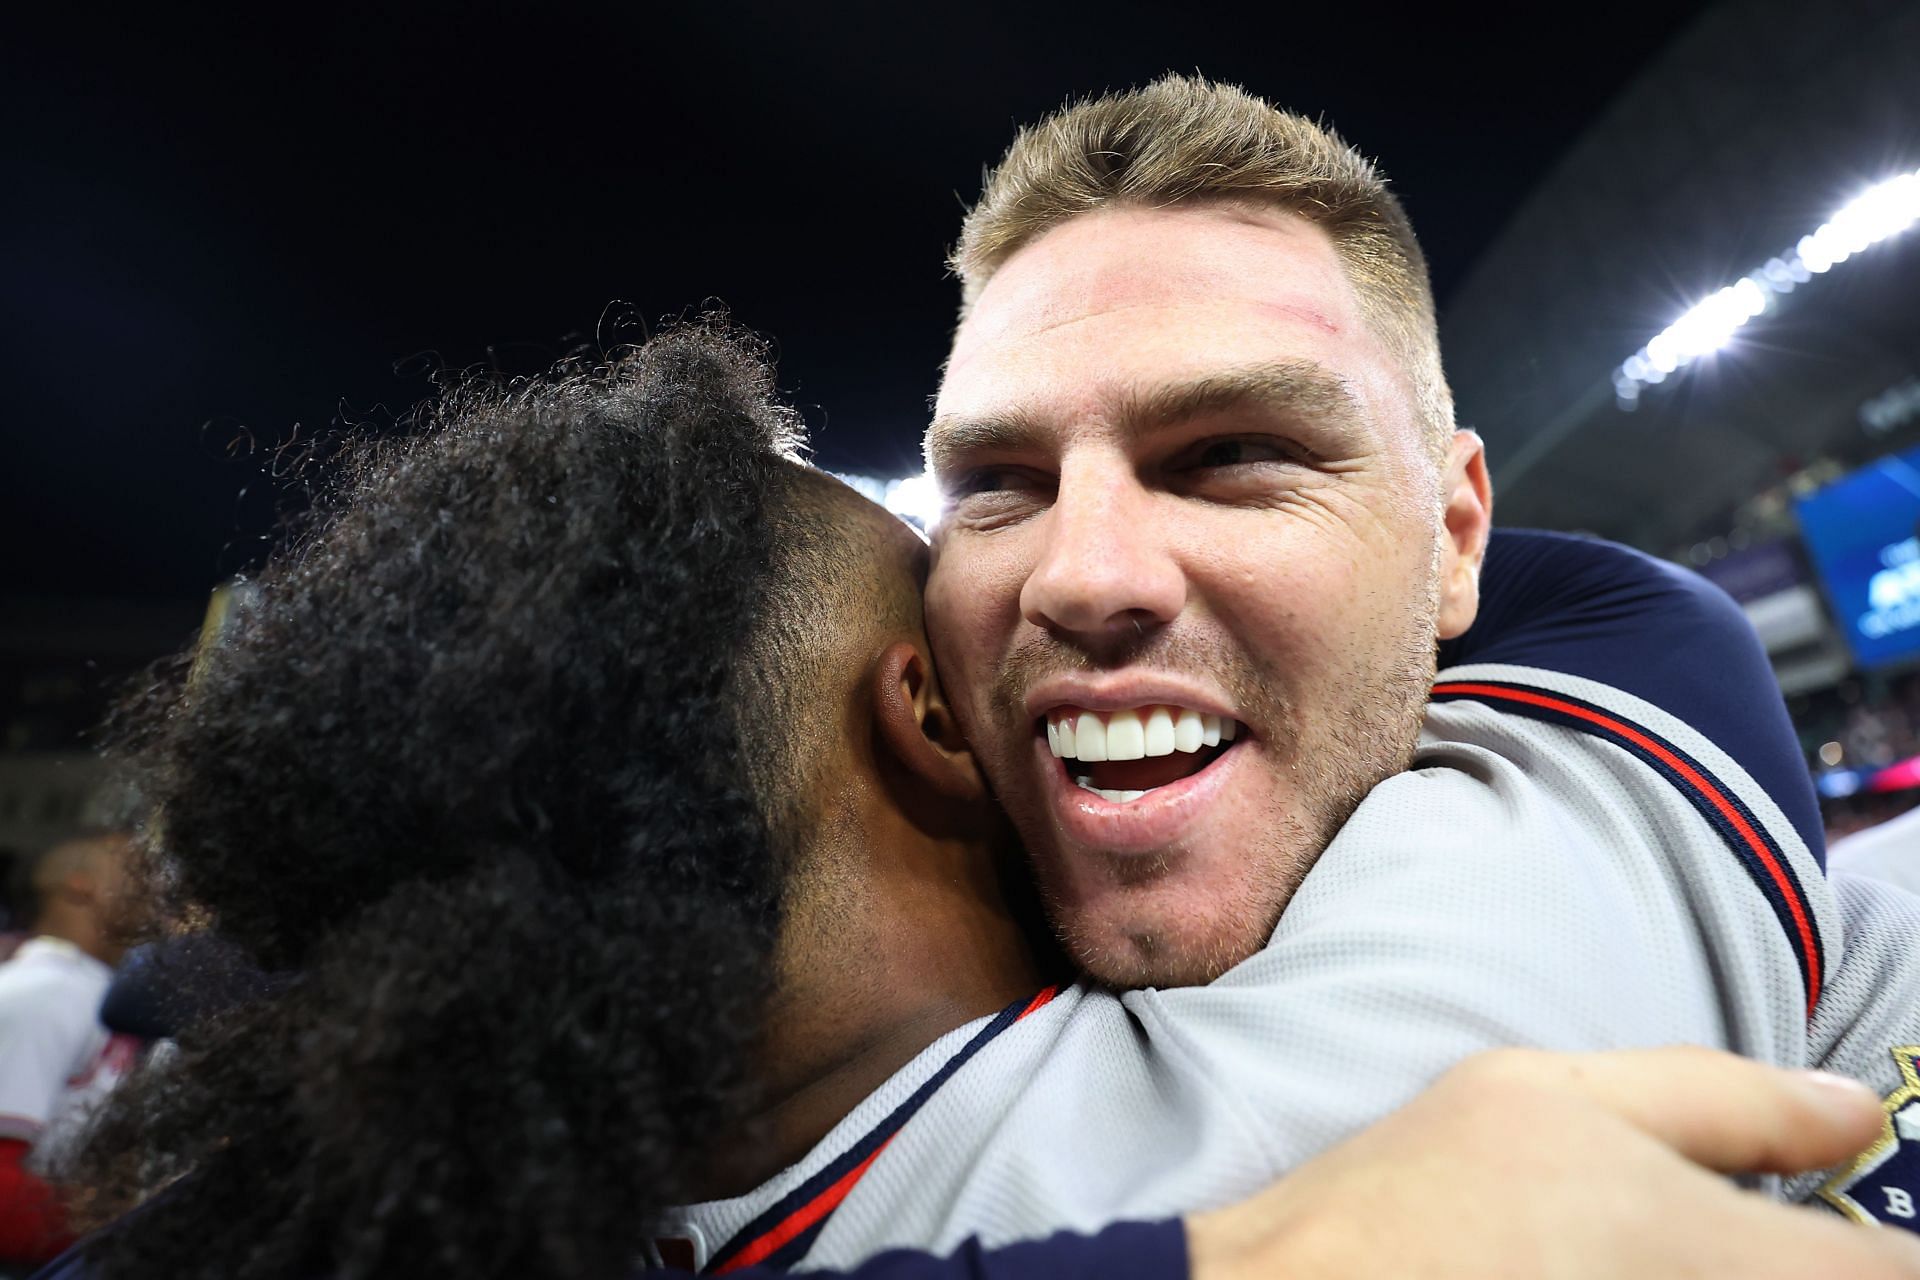 All smiles as Freddie Freeman comes to play in his own backyard